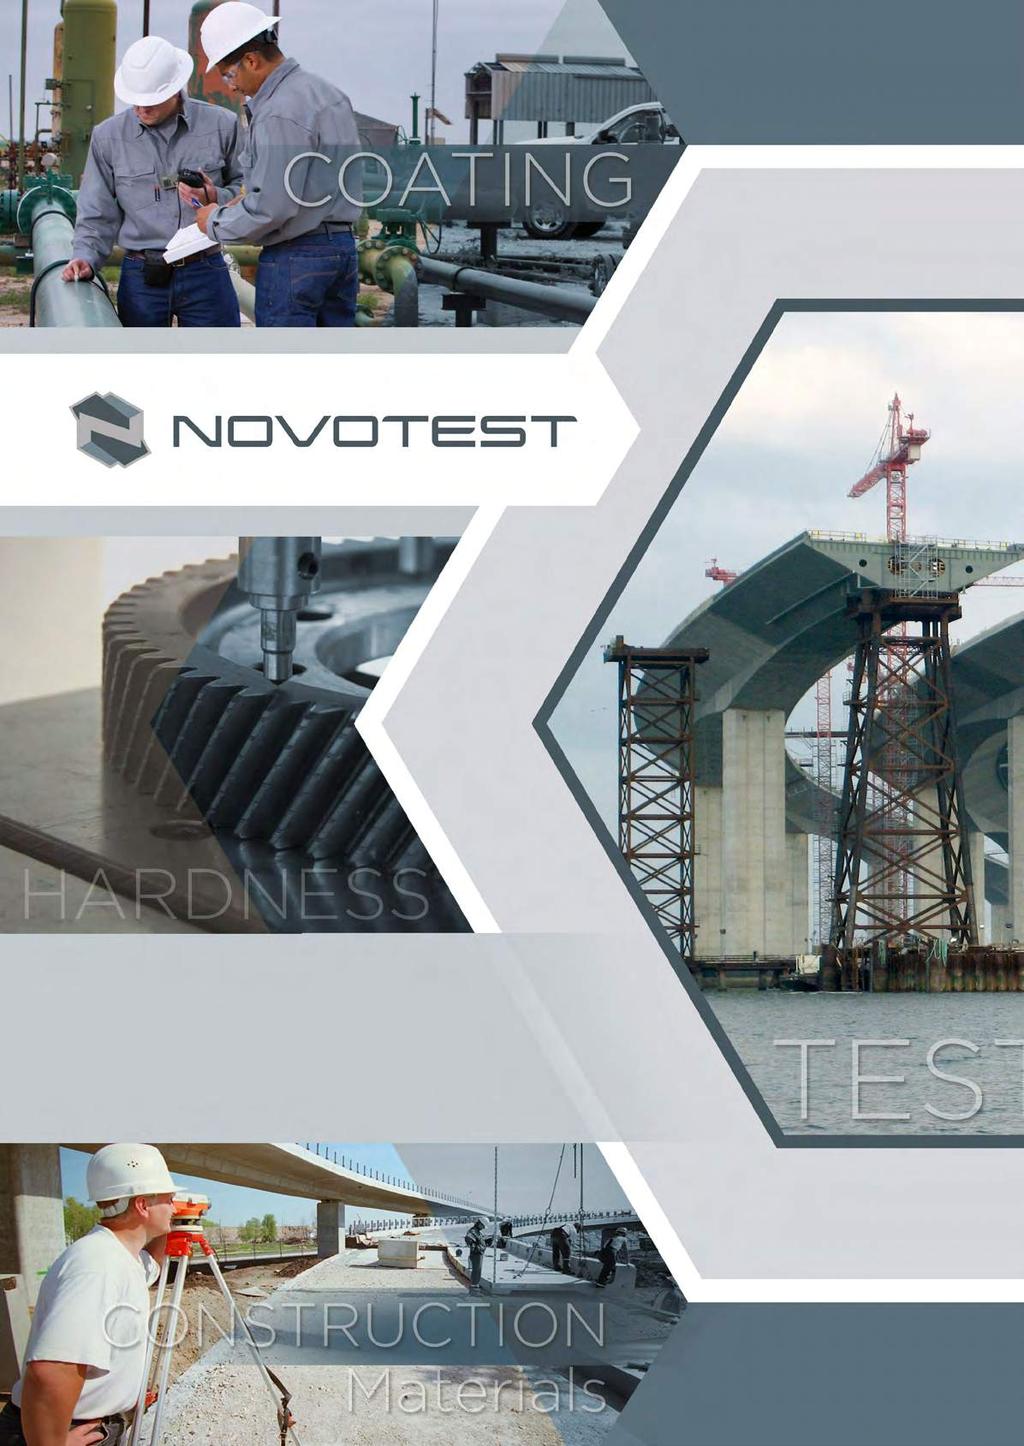 2 NOVOTEST is leading company of the manufacture